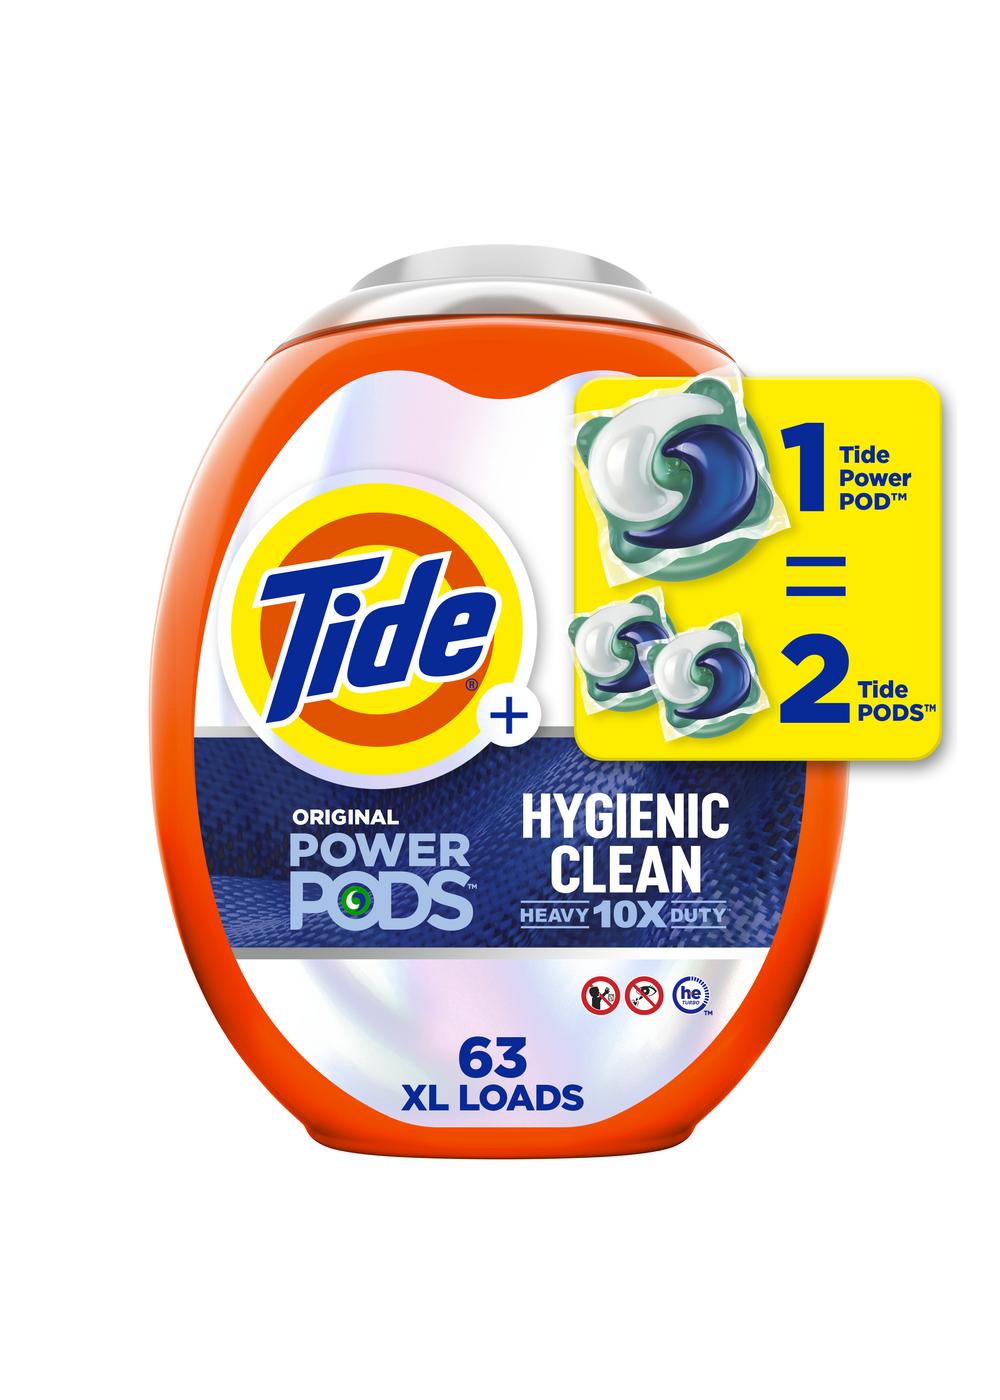 Tide Power PODS Hygienic Clean Original Scent HE Laundry Detergent Pacs; image 1 of 10